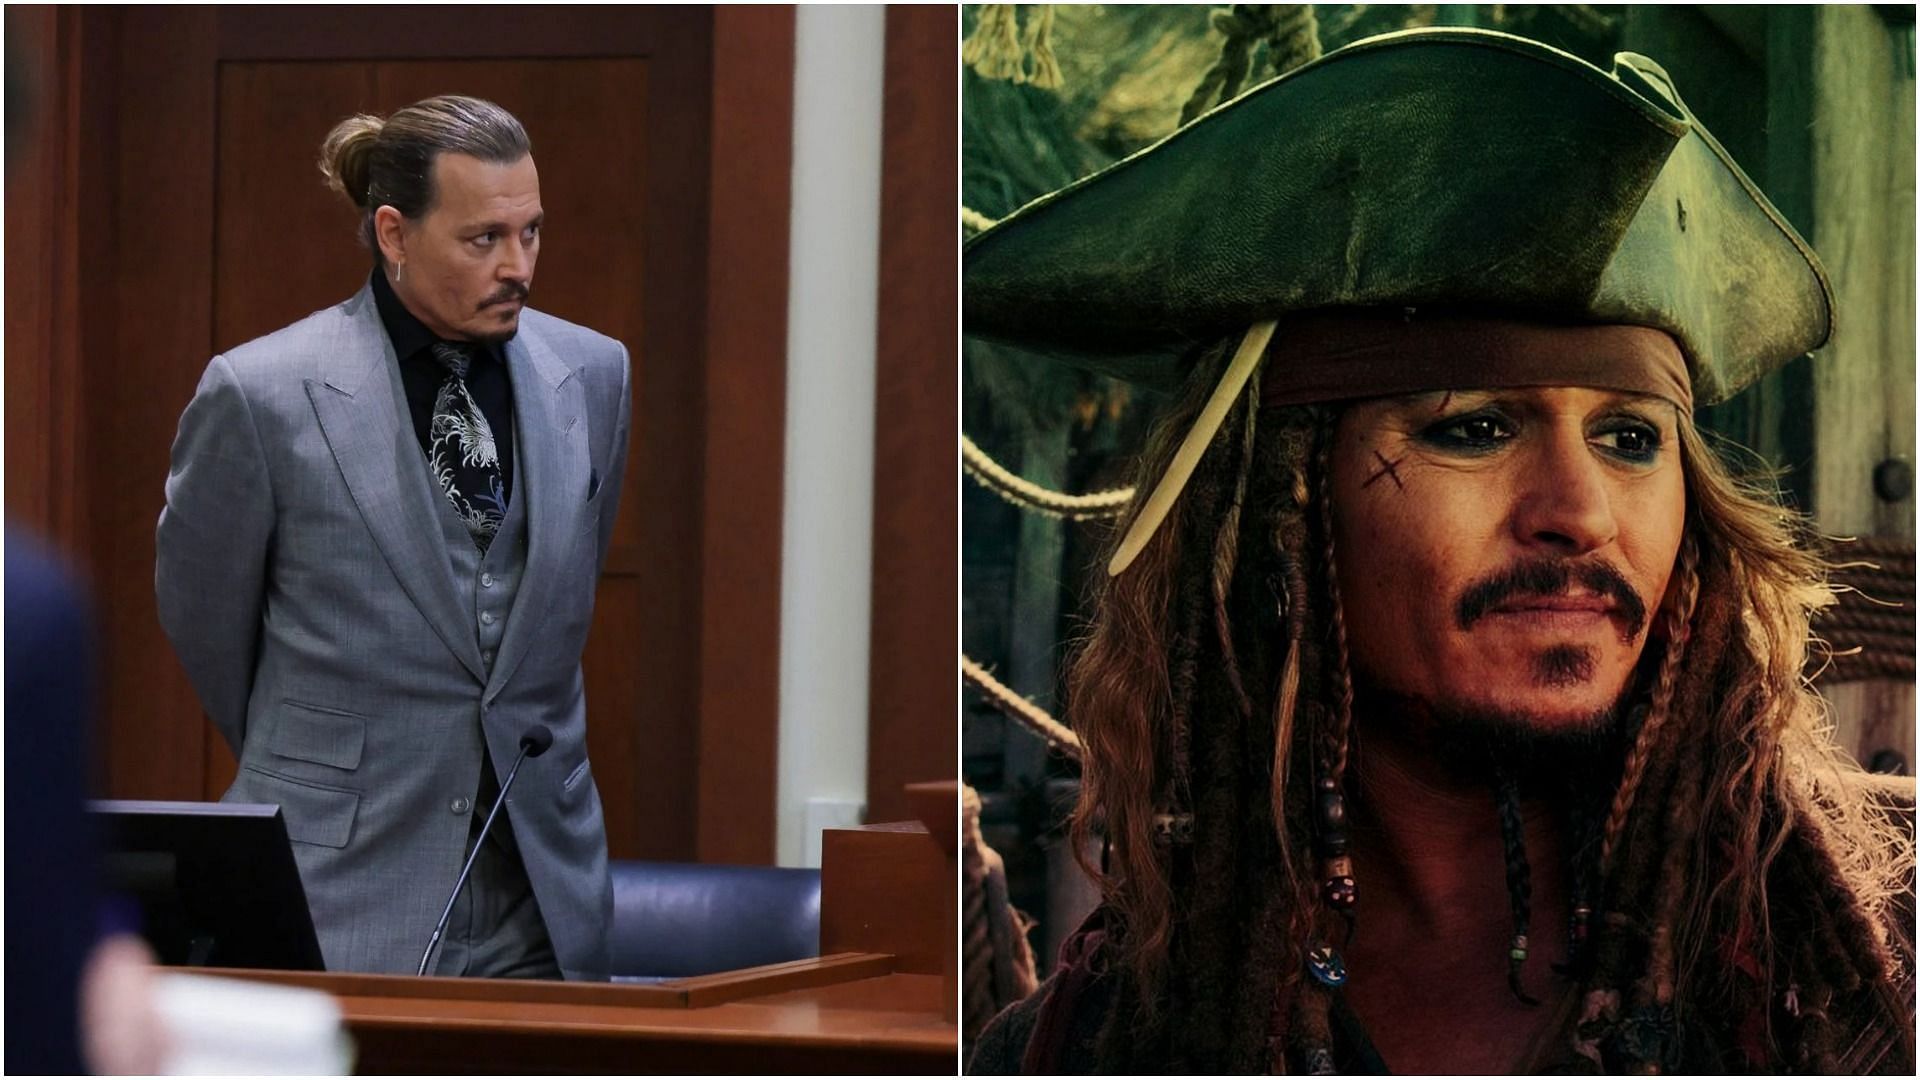 Johnny Depp in the film franchise (Image via Evelyn Hockstein/POOL/AFP/Getty Images, and The Walt Disney Company)